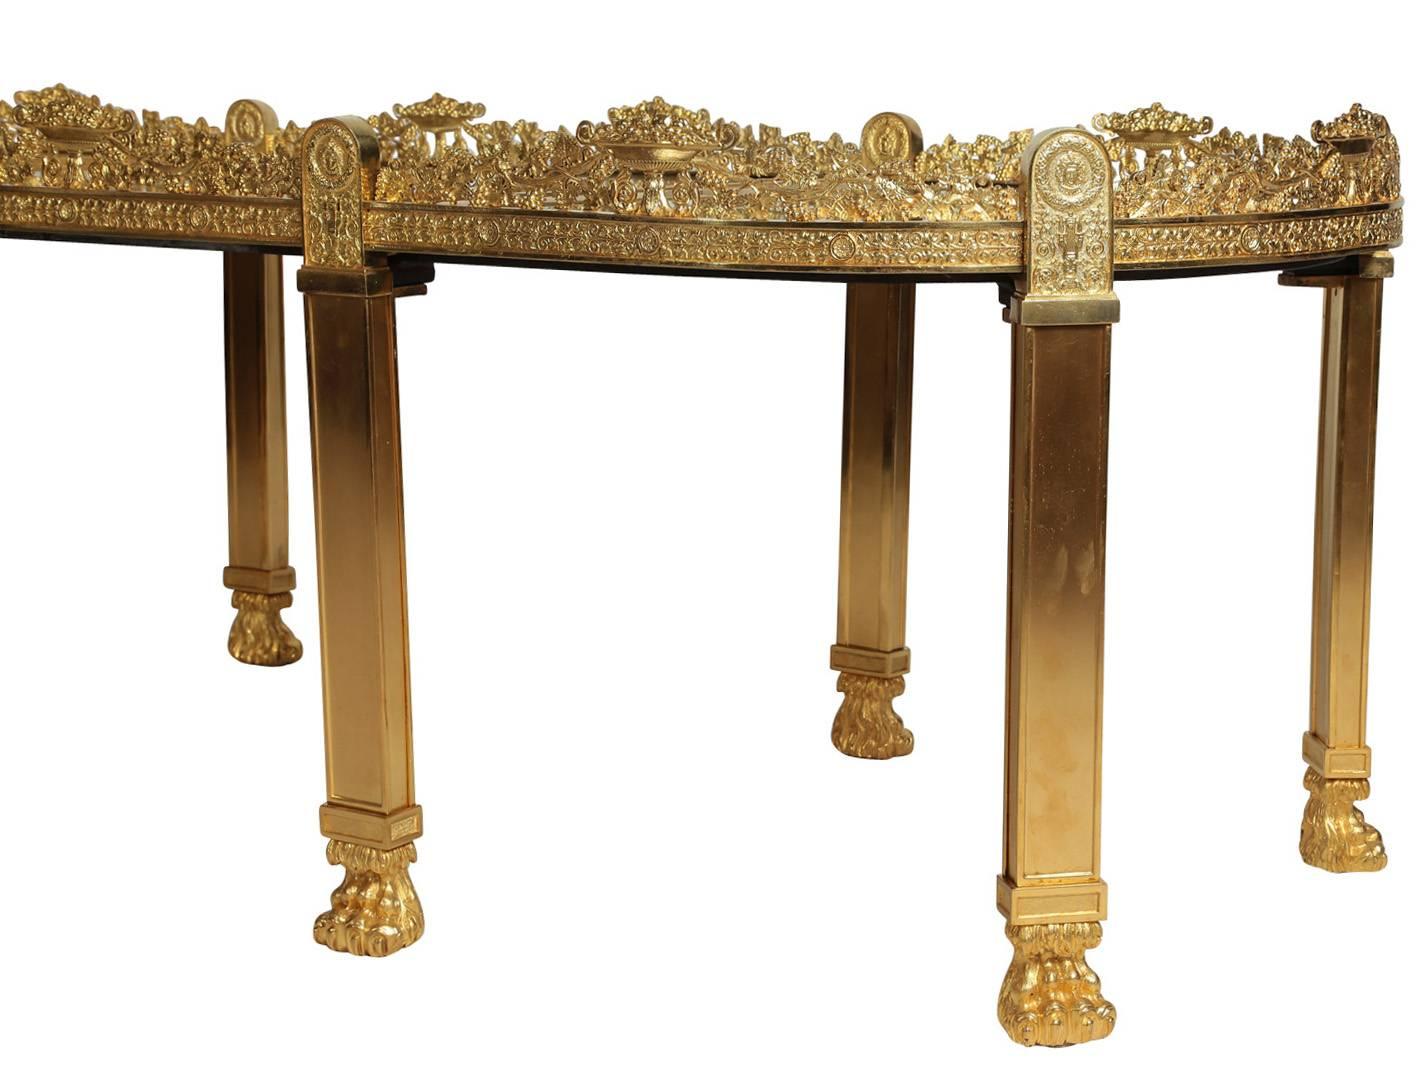 Large French Empire Style Napoleon III Gilt-Bronze Surtout-de-table Coffee Table In Good Condition For Sale In Los Angeles, CA